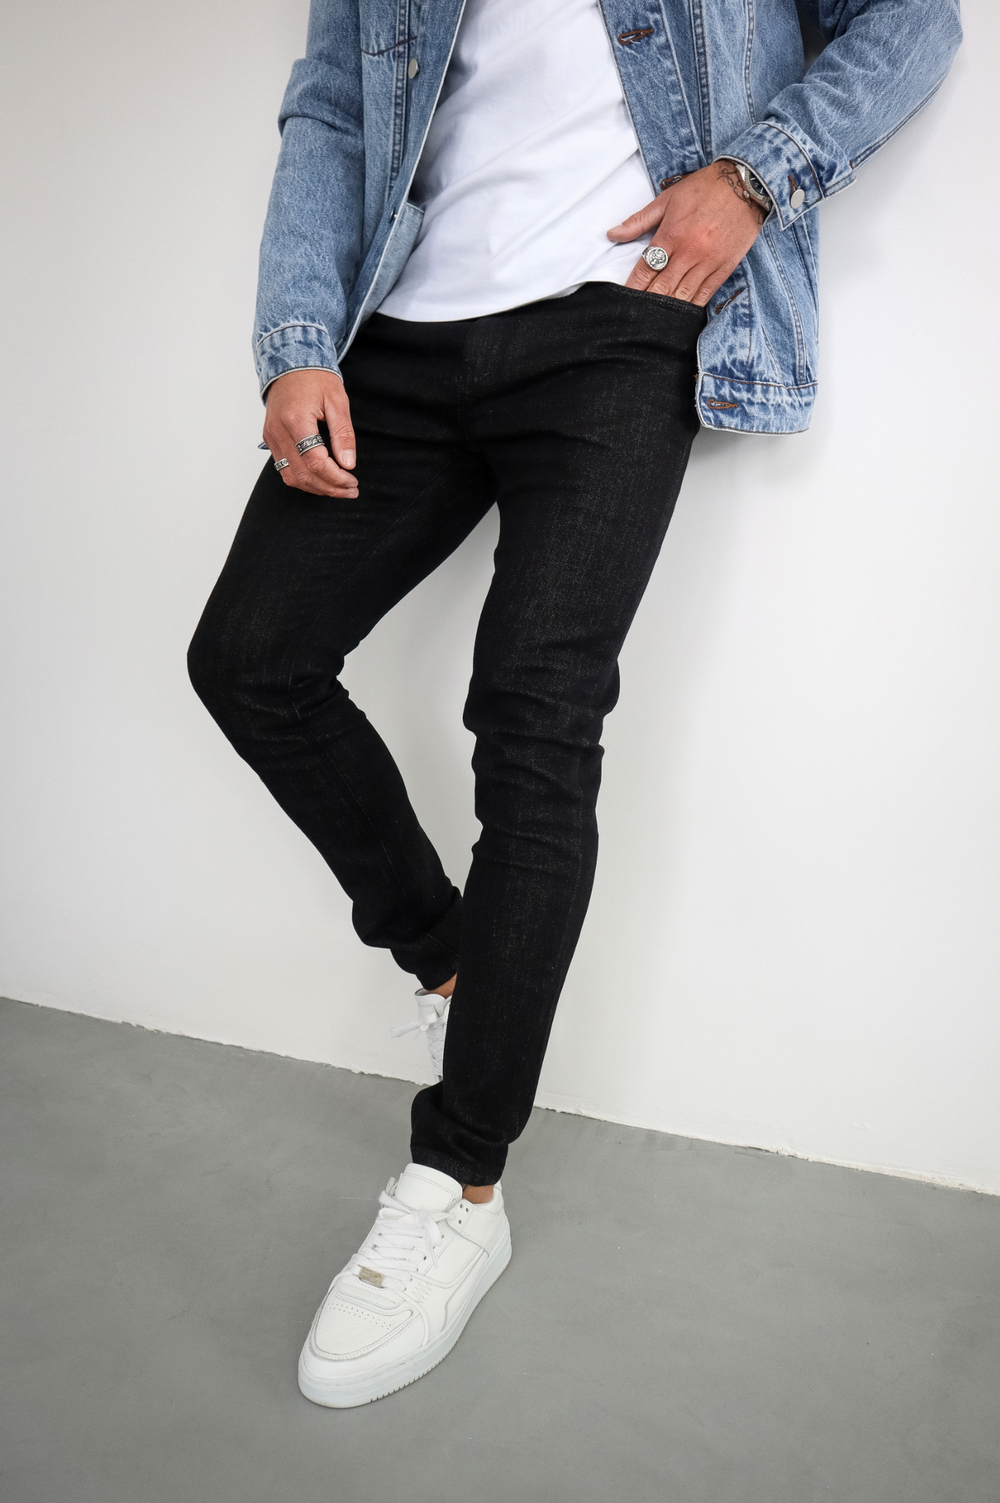 Capo Slim Fit Denim Jeans - Black – CAPO | Meaning Behind The Brand